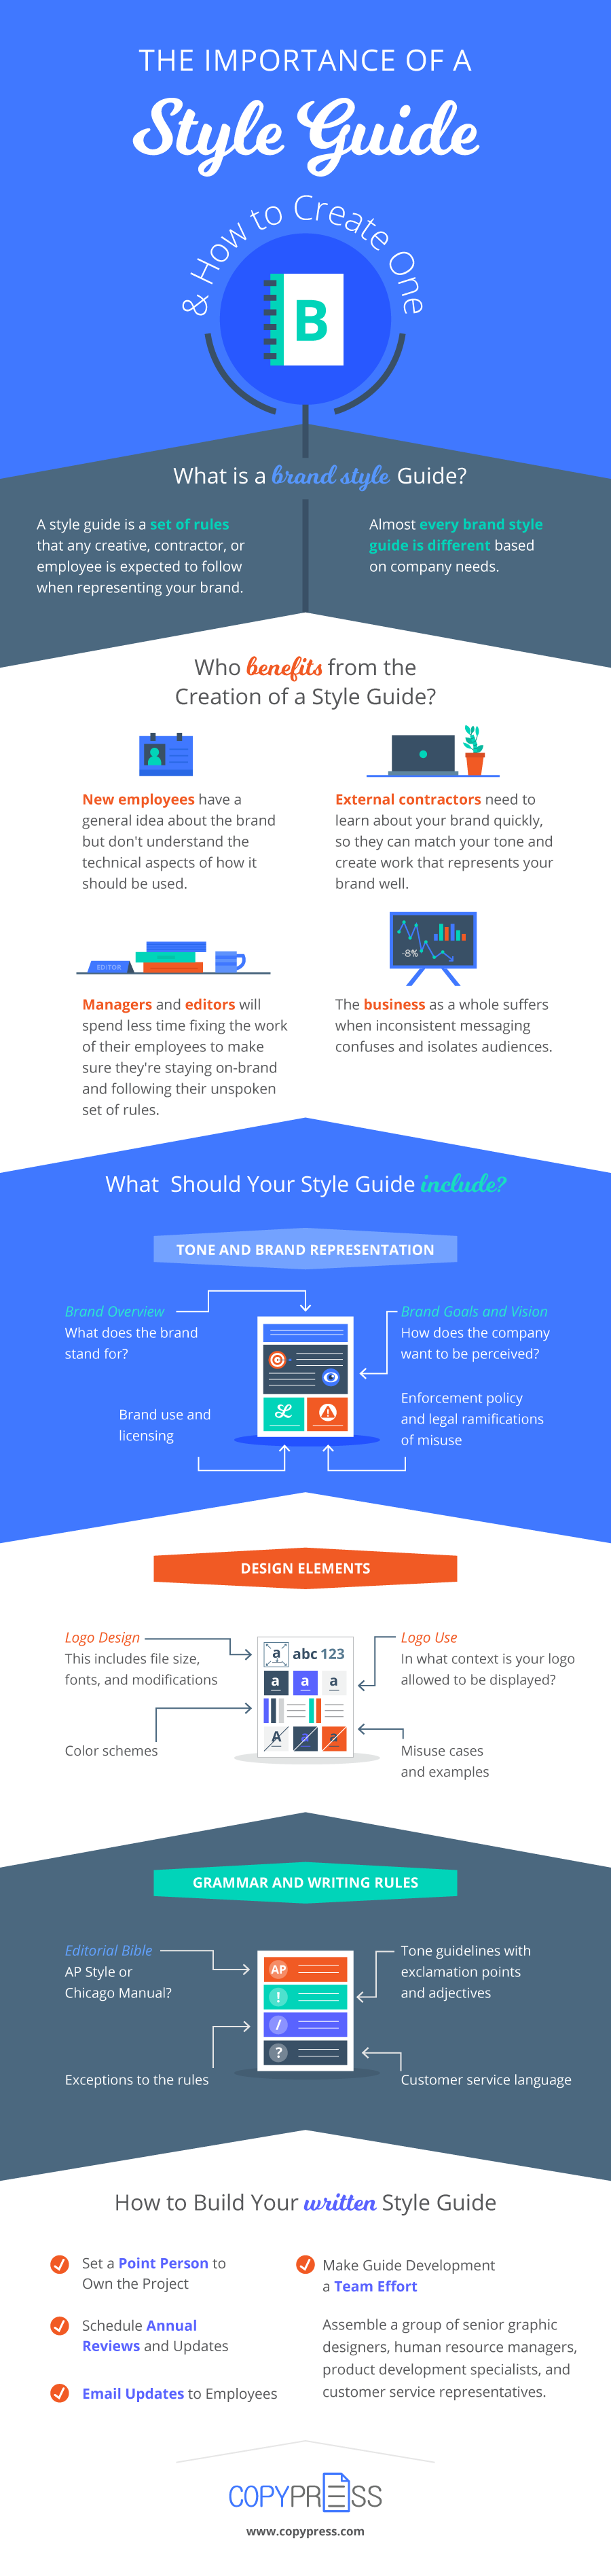 Understanding the Importance of a Style Guide